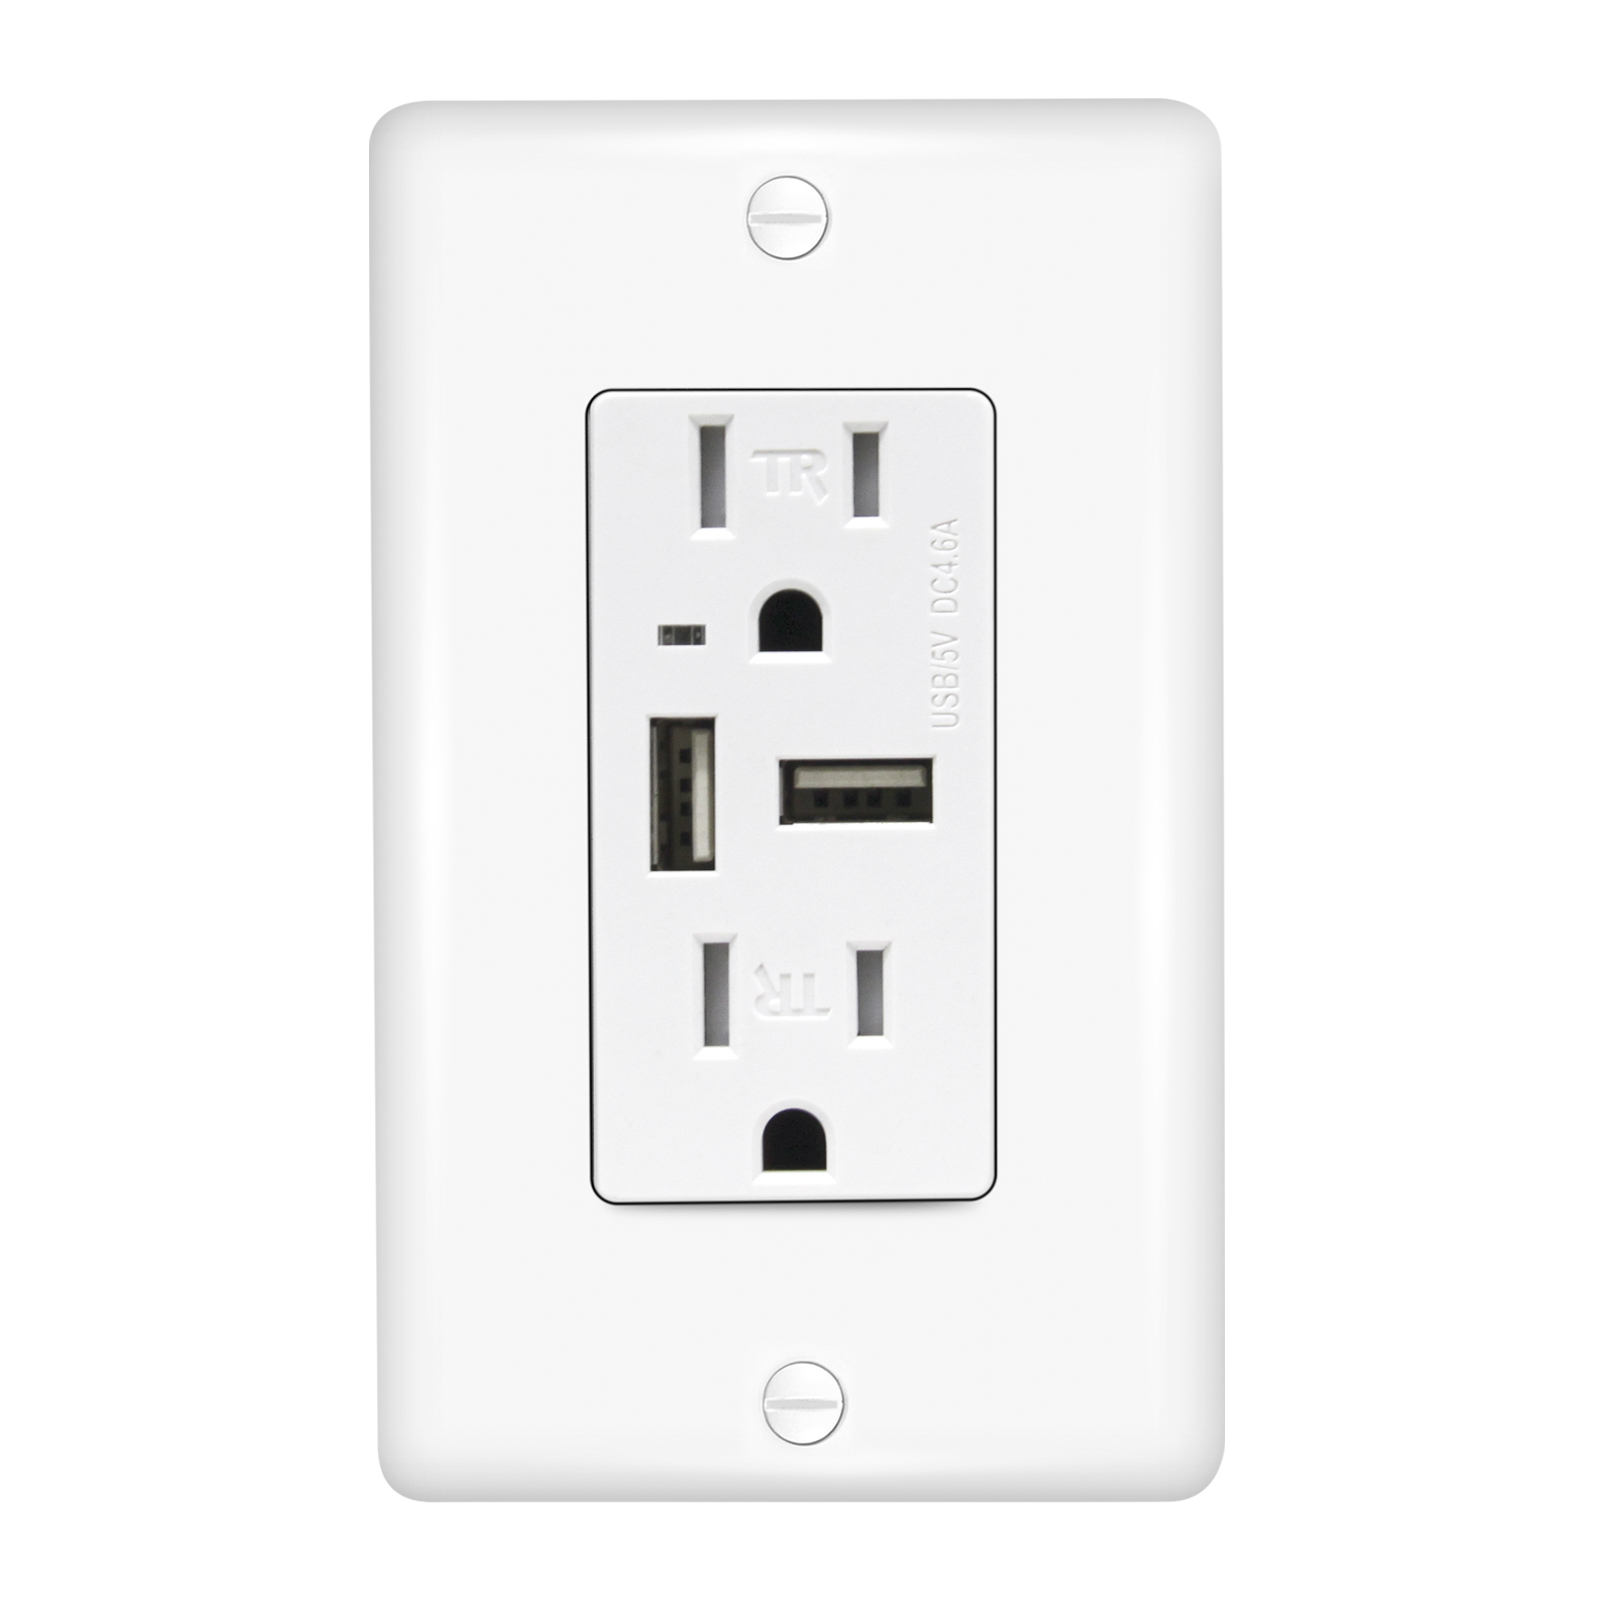 Faith USB Wall Outlets CZ-06 4.6 Amp Dual USB Charger, 15 Amp Duplex Tamper Resistant Outlet